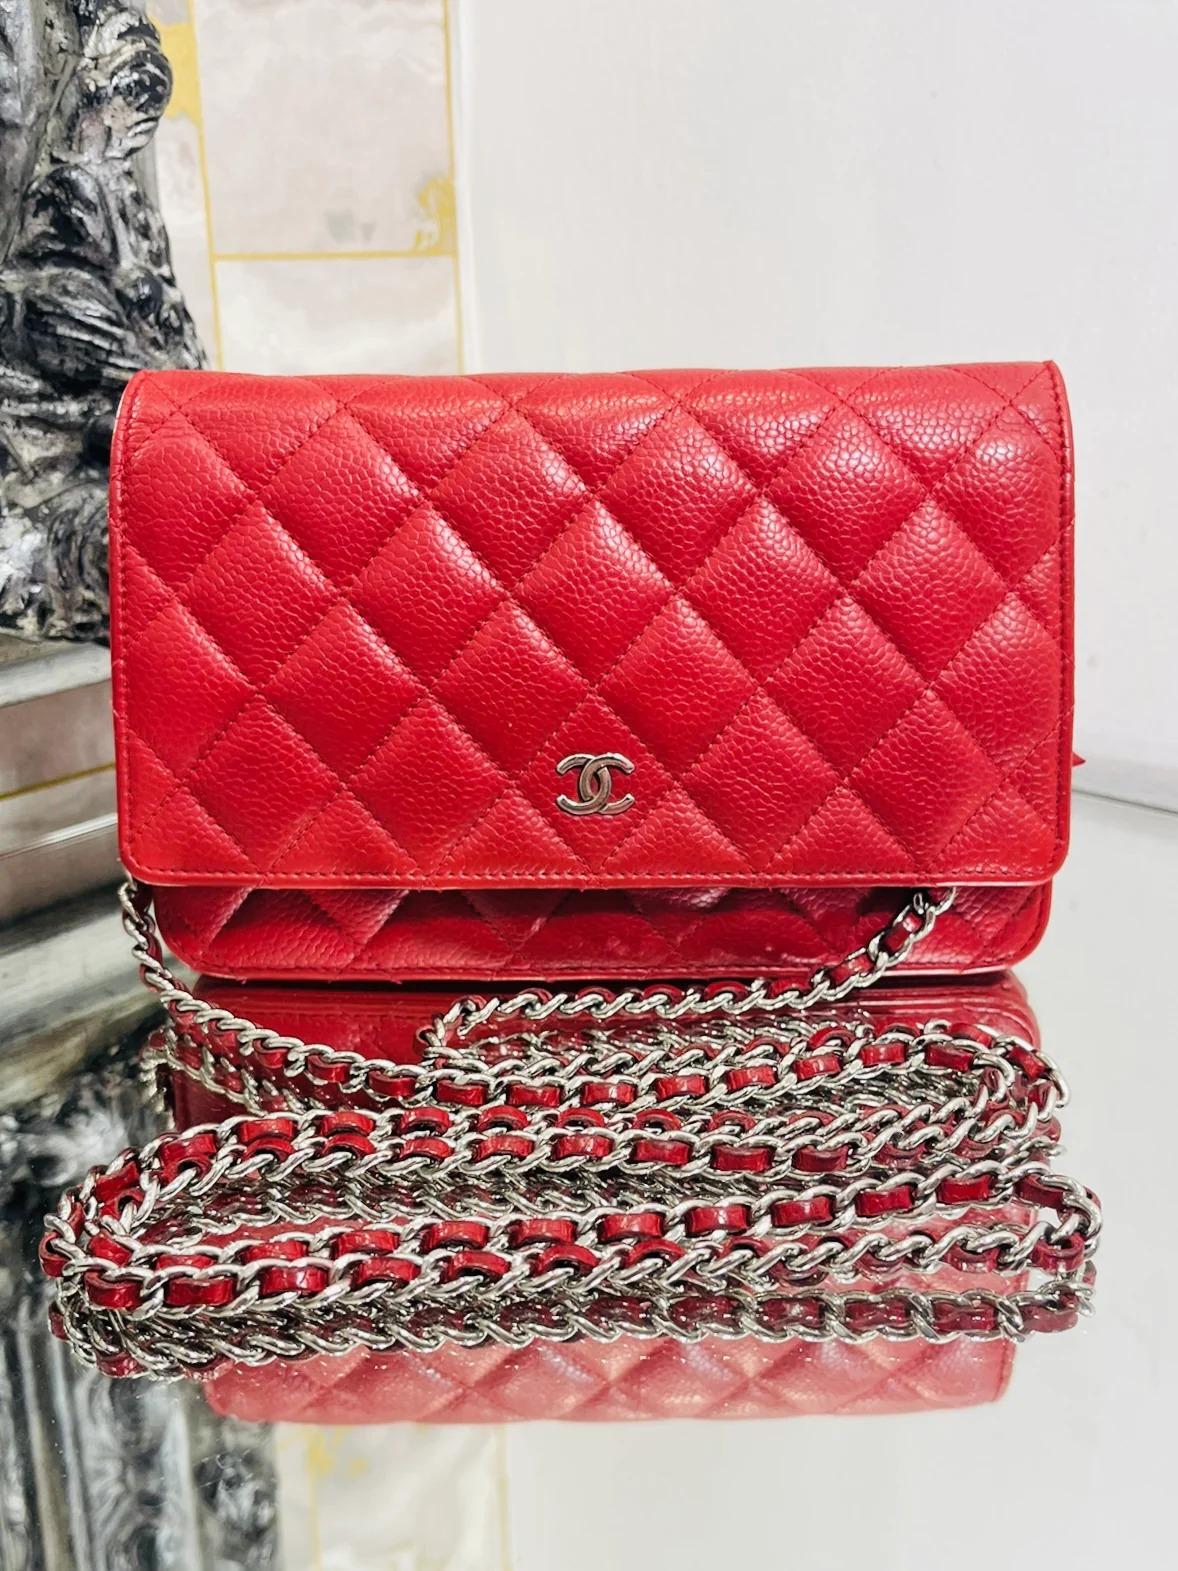 Chanel Leather Wallet On A Chain

Timeless, red, caviar leather, crossbody bag with signature diamond stitching. Silver 'CC' logo to the front and iconic leather and chain strap. Features a rear open pocket, internal  card slots and a zipper pocket.